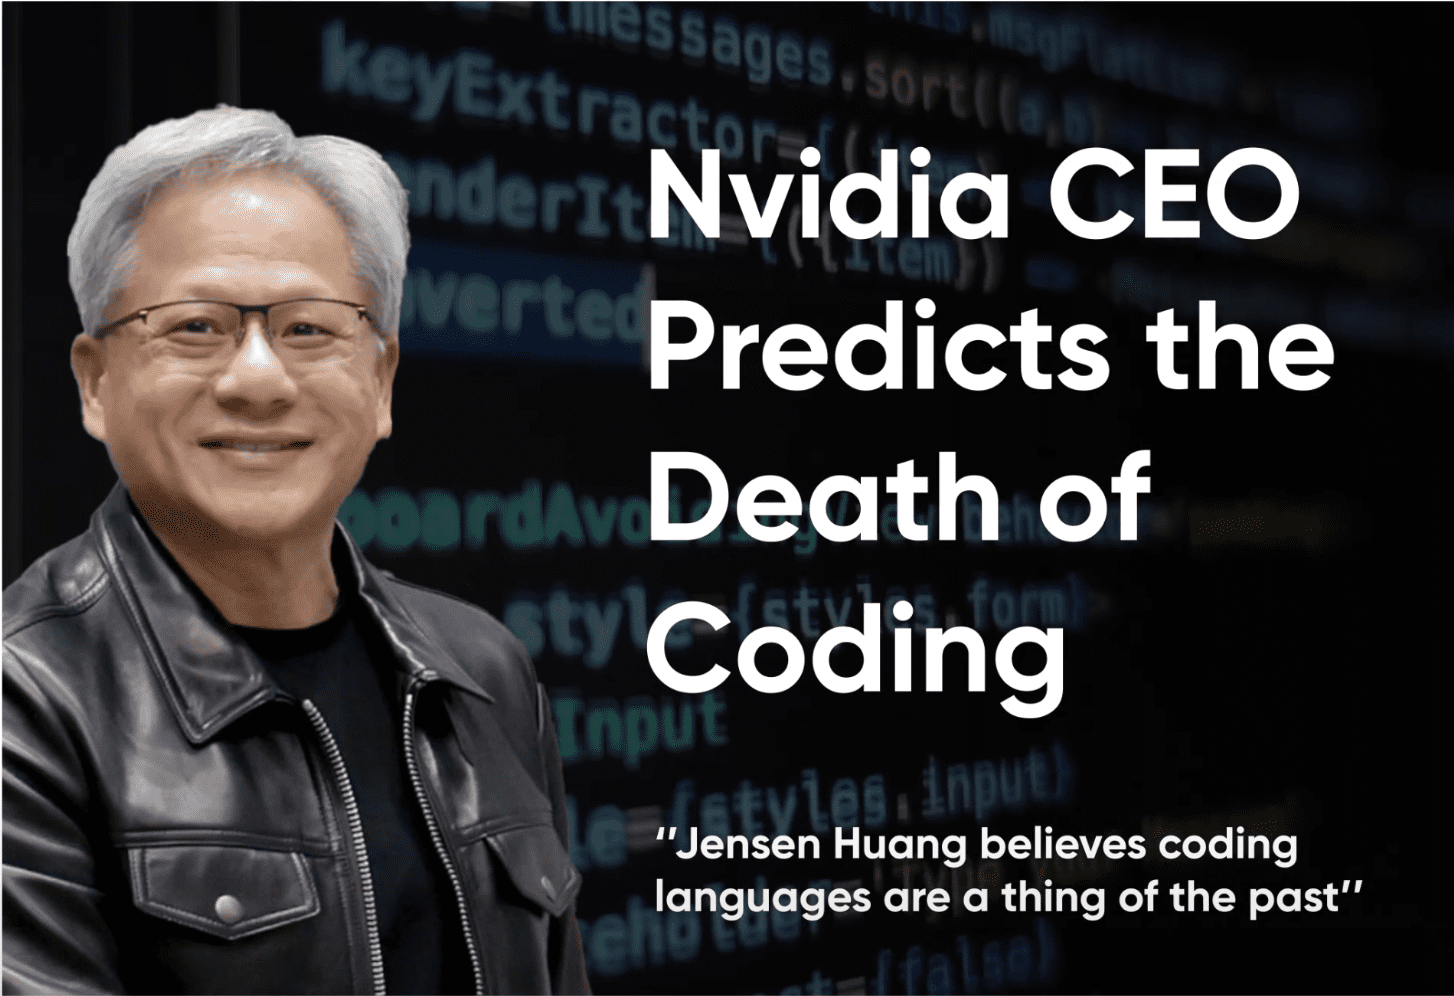 Nvidia's CEO, Jensen Huang predicts death of coding